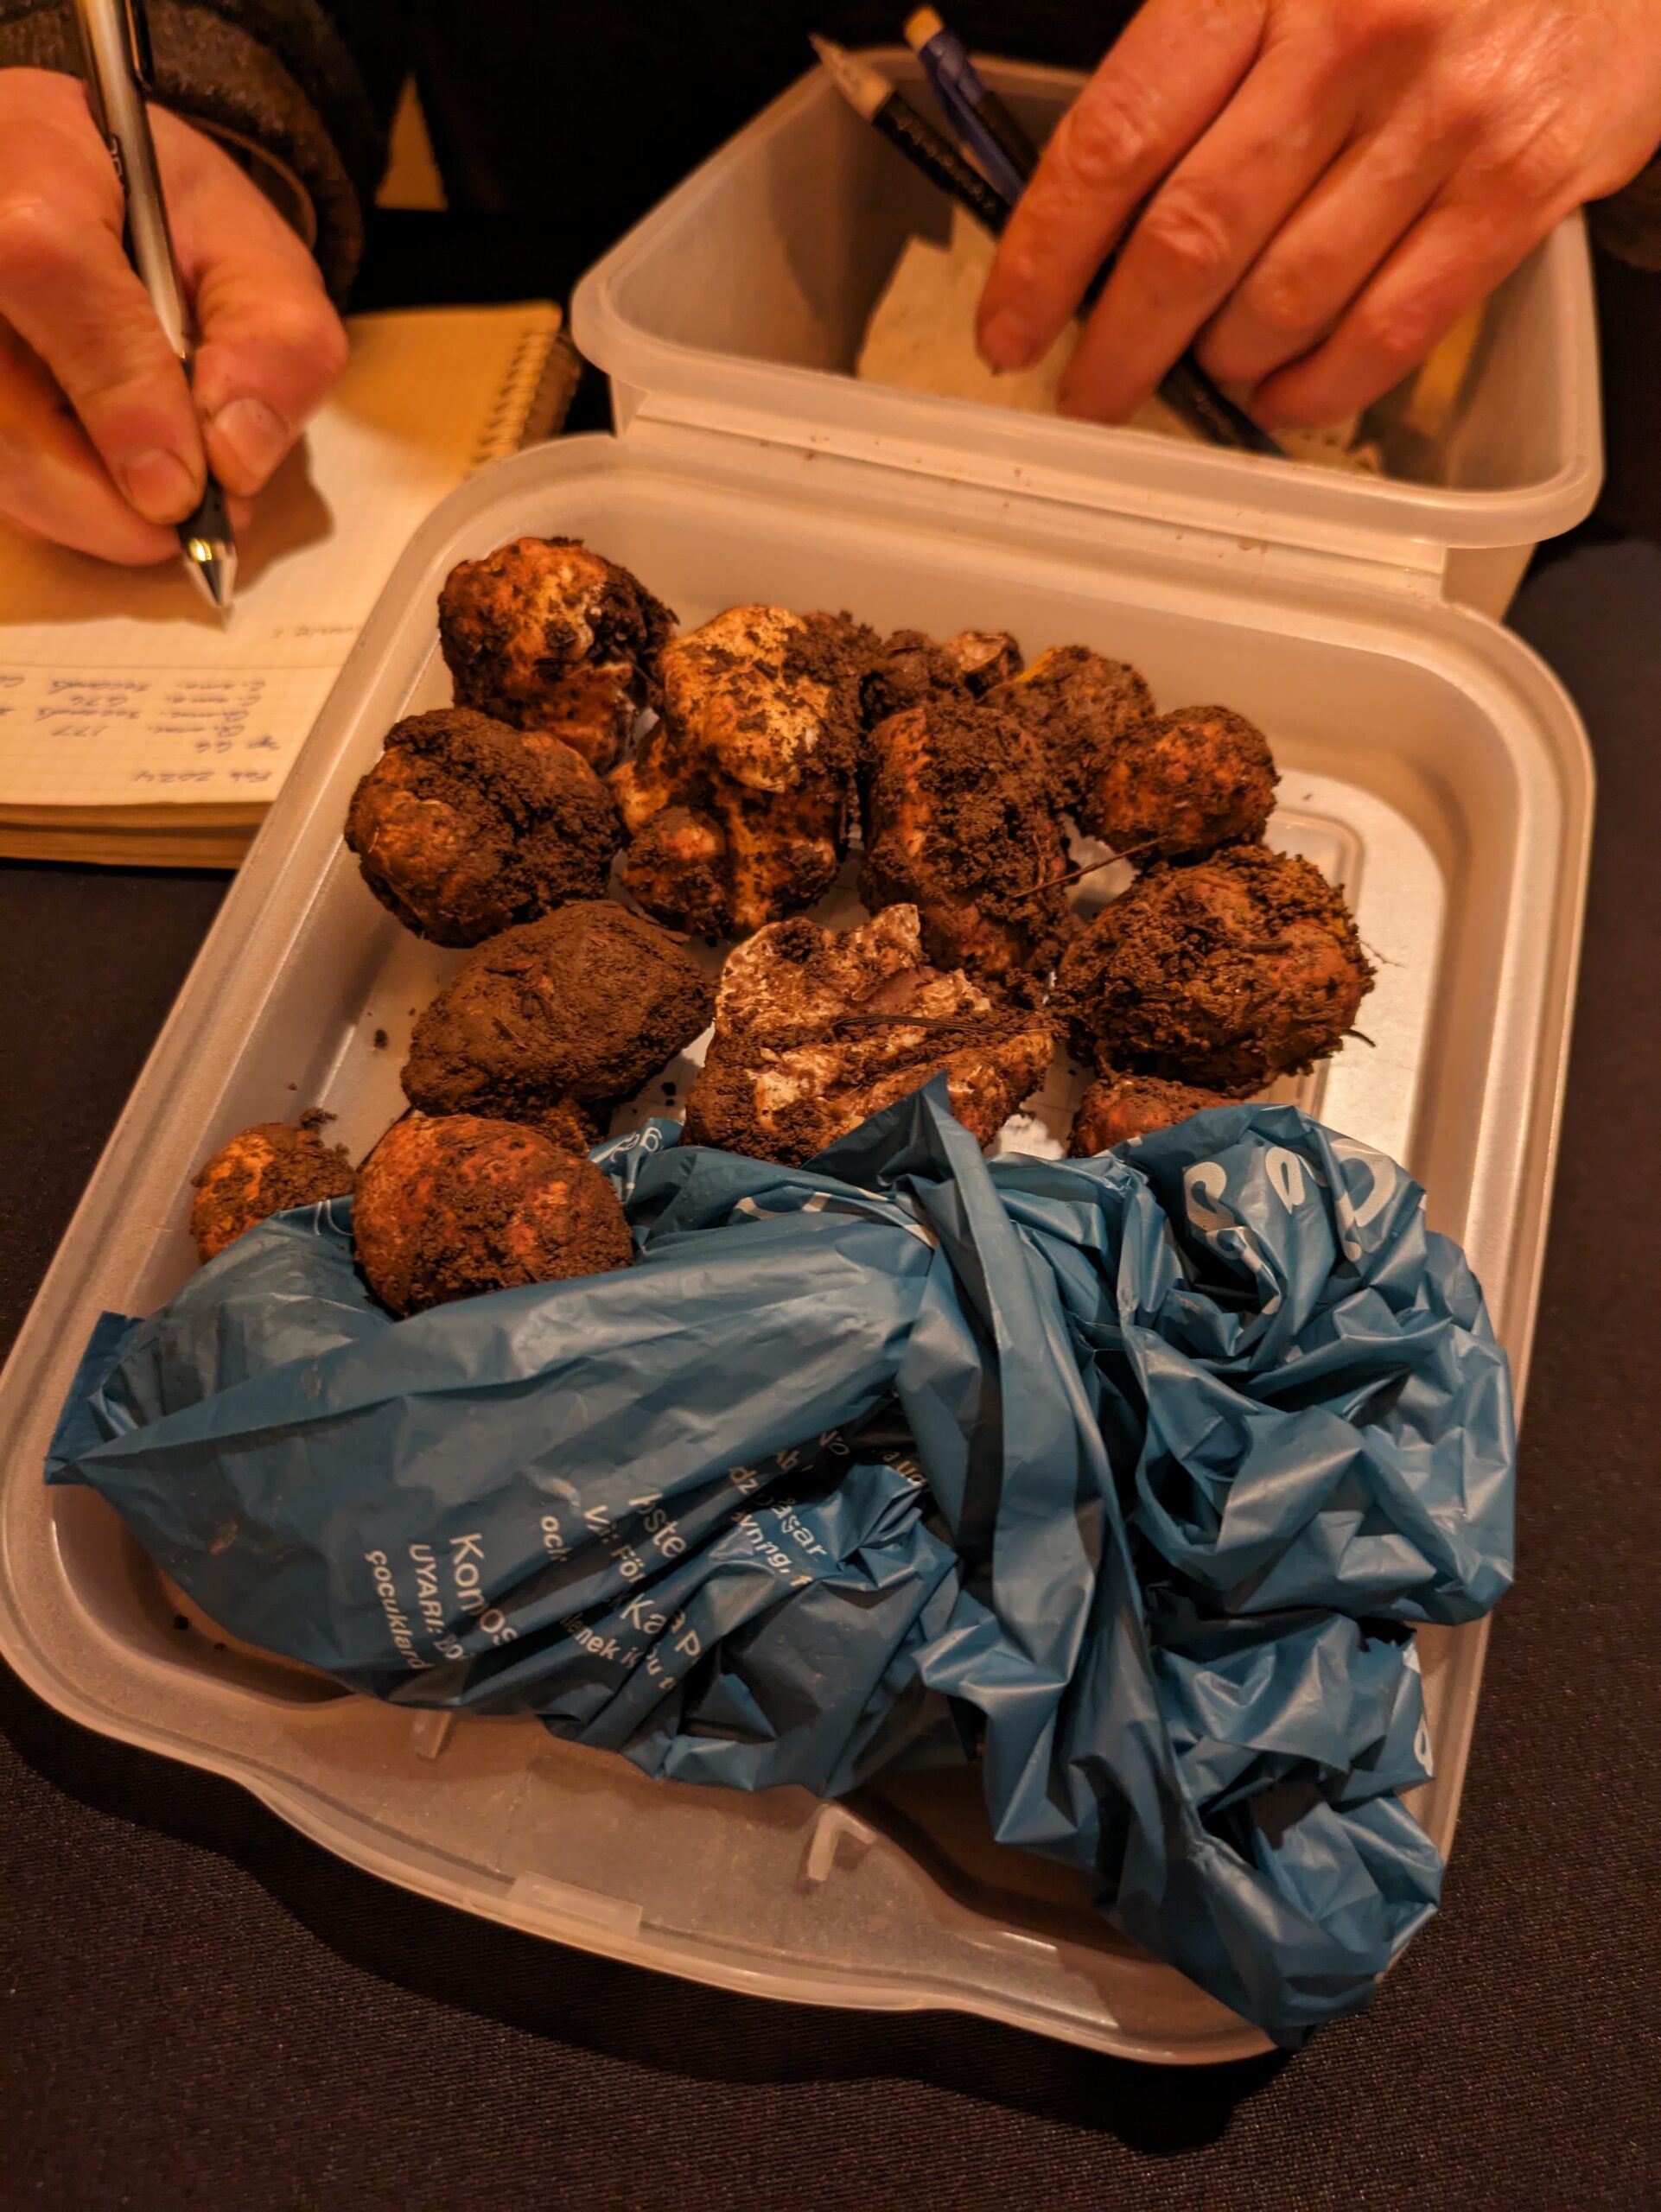 A pile of truffles during the count.